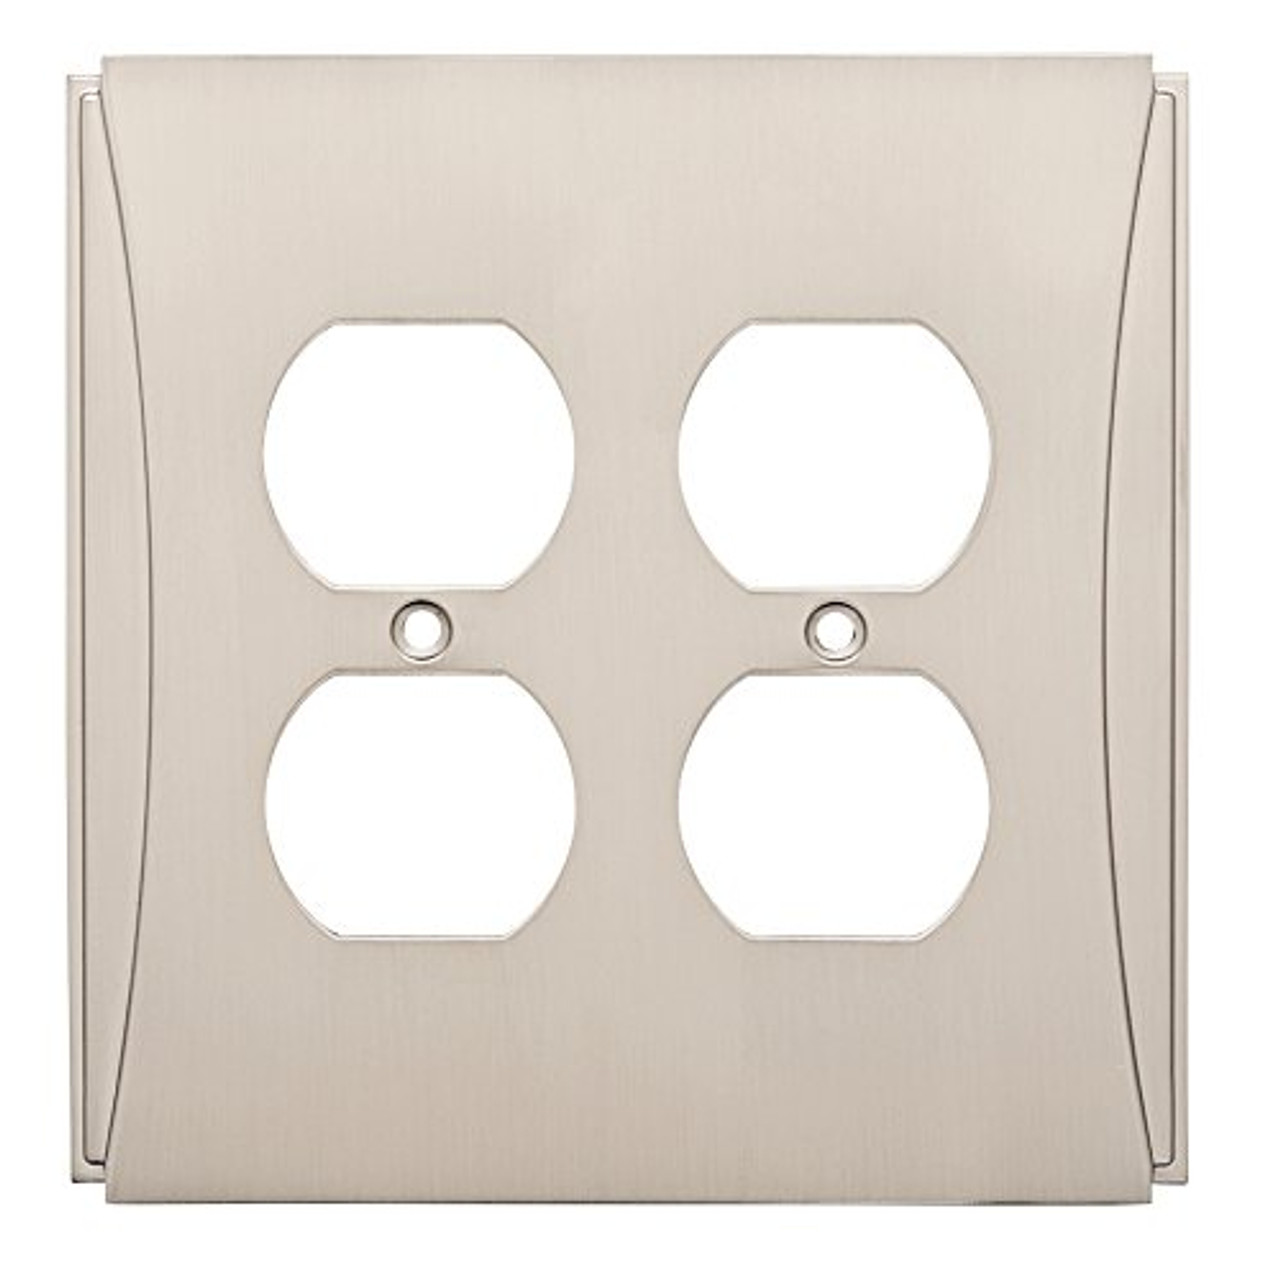 W32777SN Upton Satin Nickel Double Duplex Outlet Cover Plate